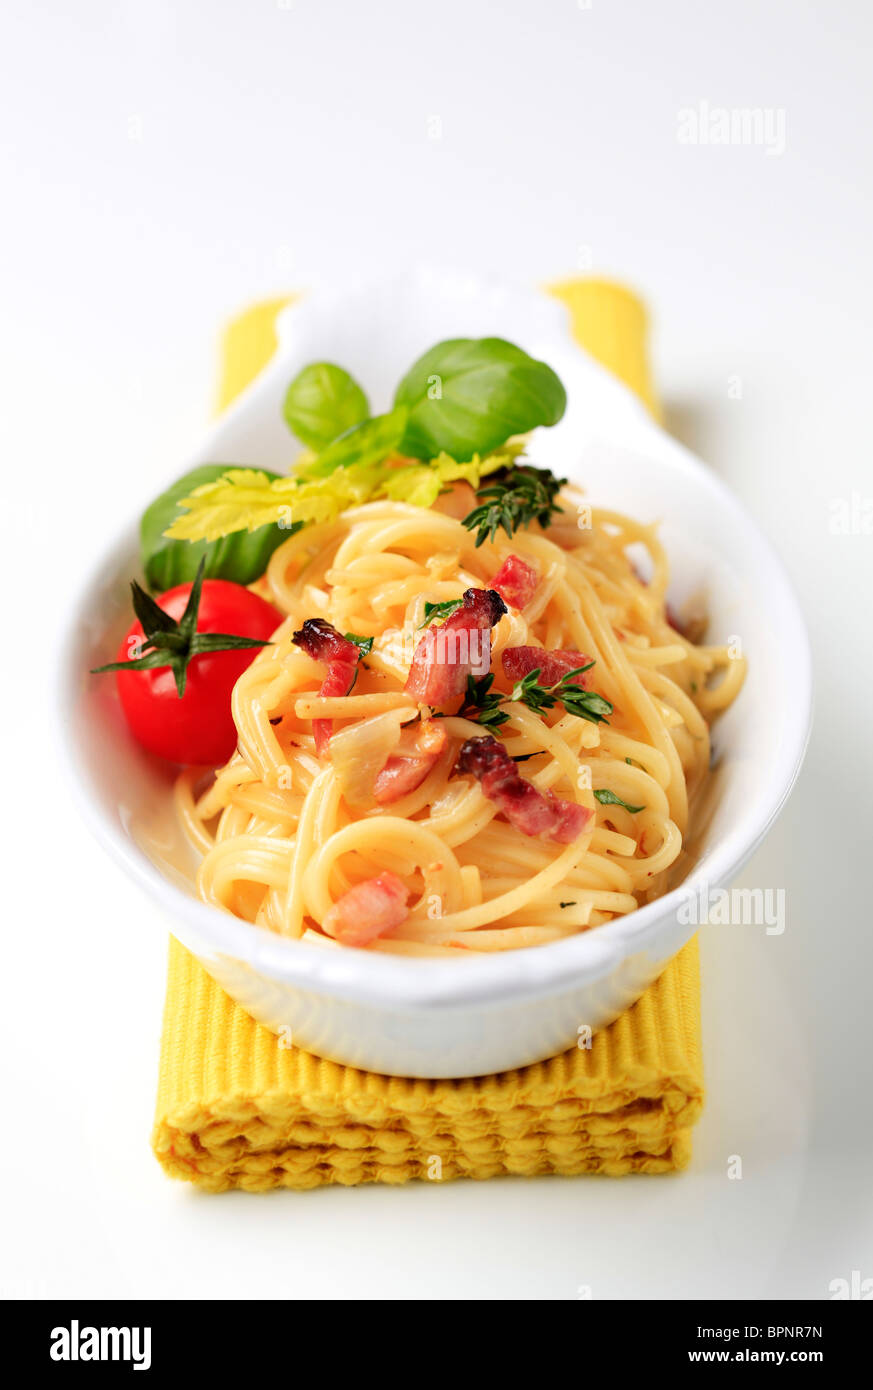 Spaghetti with bacon and onion Stock Photo